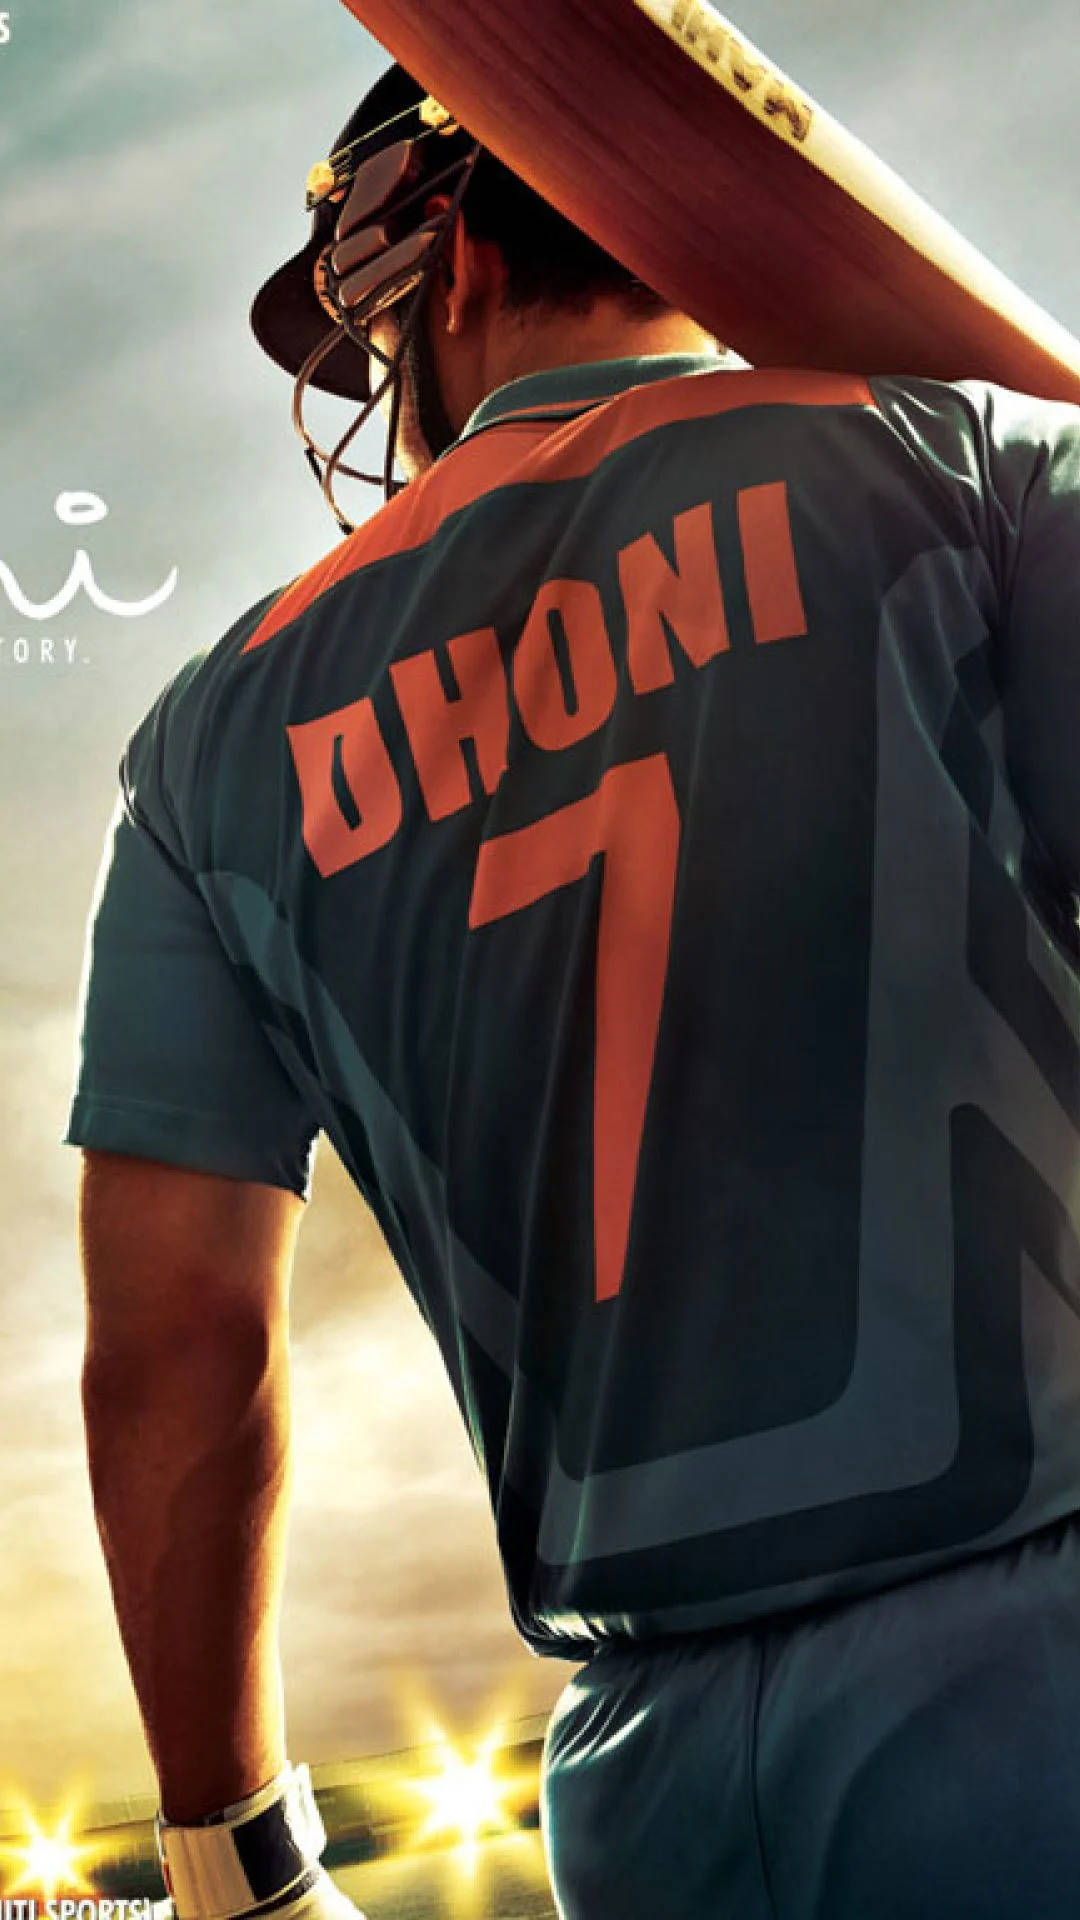 Free Dhoni 7 Wallpaper Downloads, [100+] Dhoni 7 Wallpapers for FREE |  